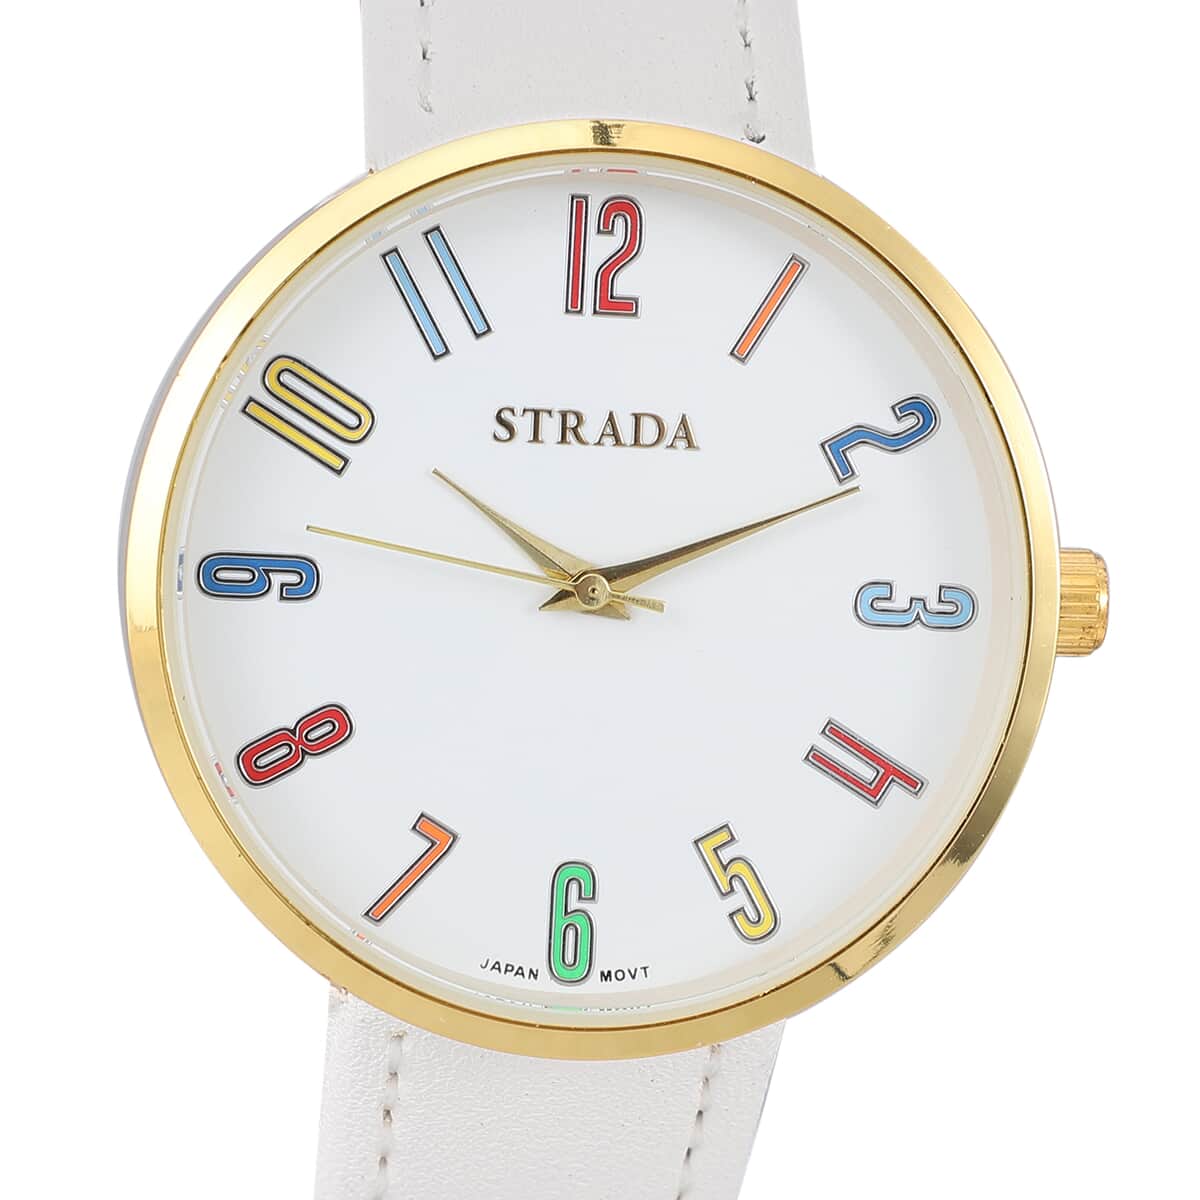 Strada Japanese Movement Water Resistant Watch with White Faux Leather Band image number 3